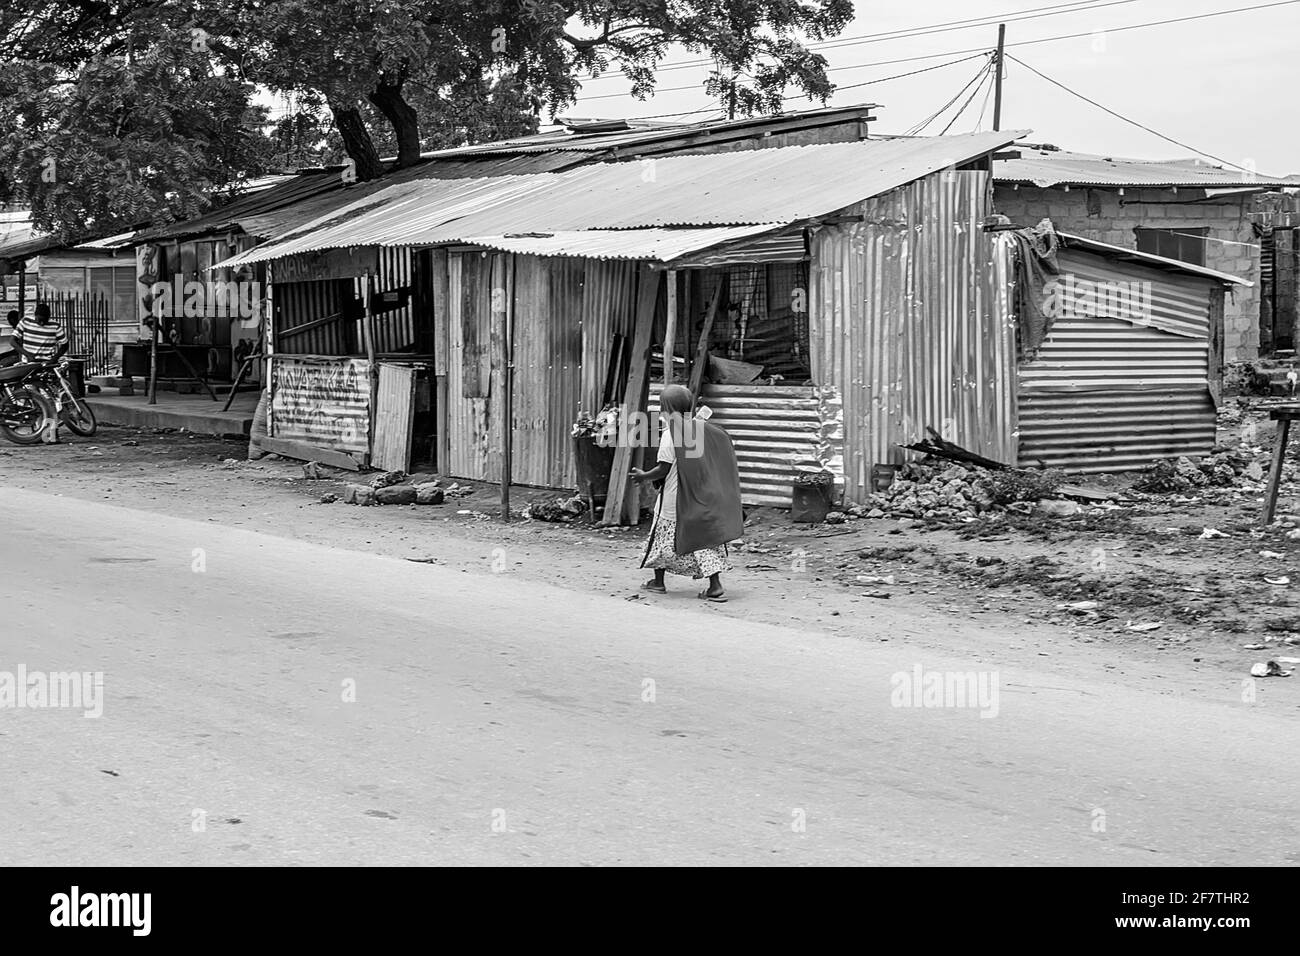 March, 18, 2020 - Nungwi, Tanzania: real street life at day on road black and white Stock Photo